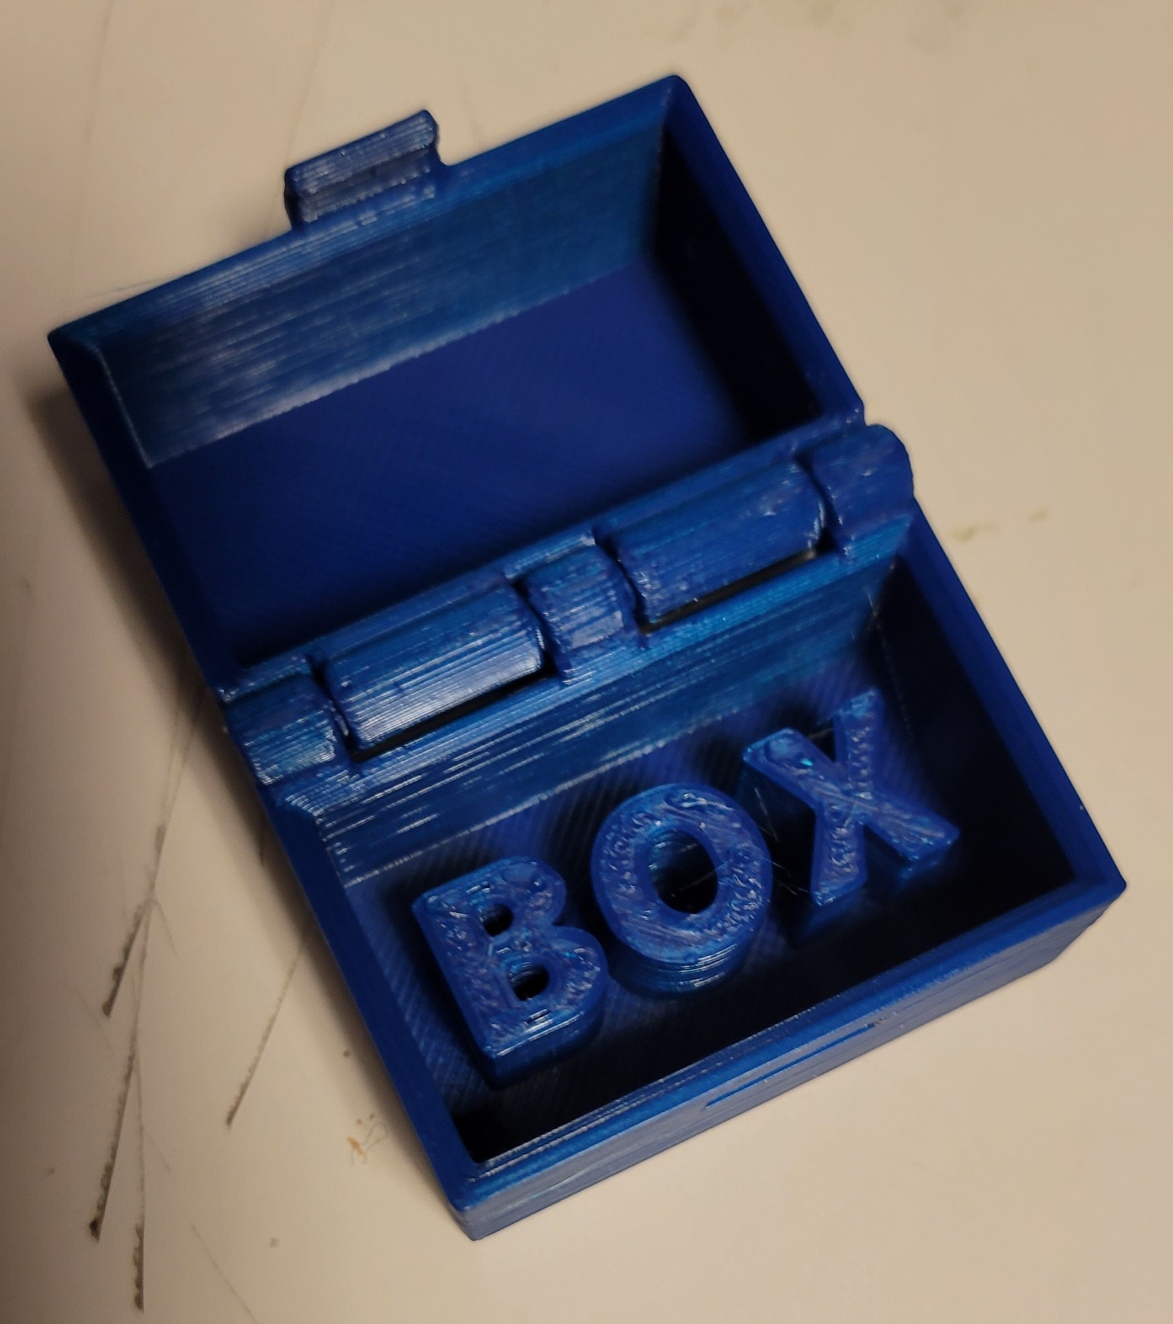 THINK outside the BOX by LeoK | Download free STL model | Printables.com